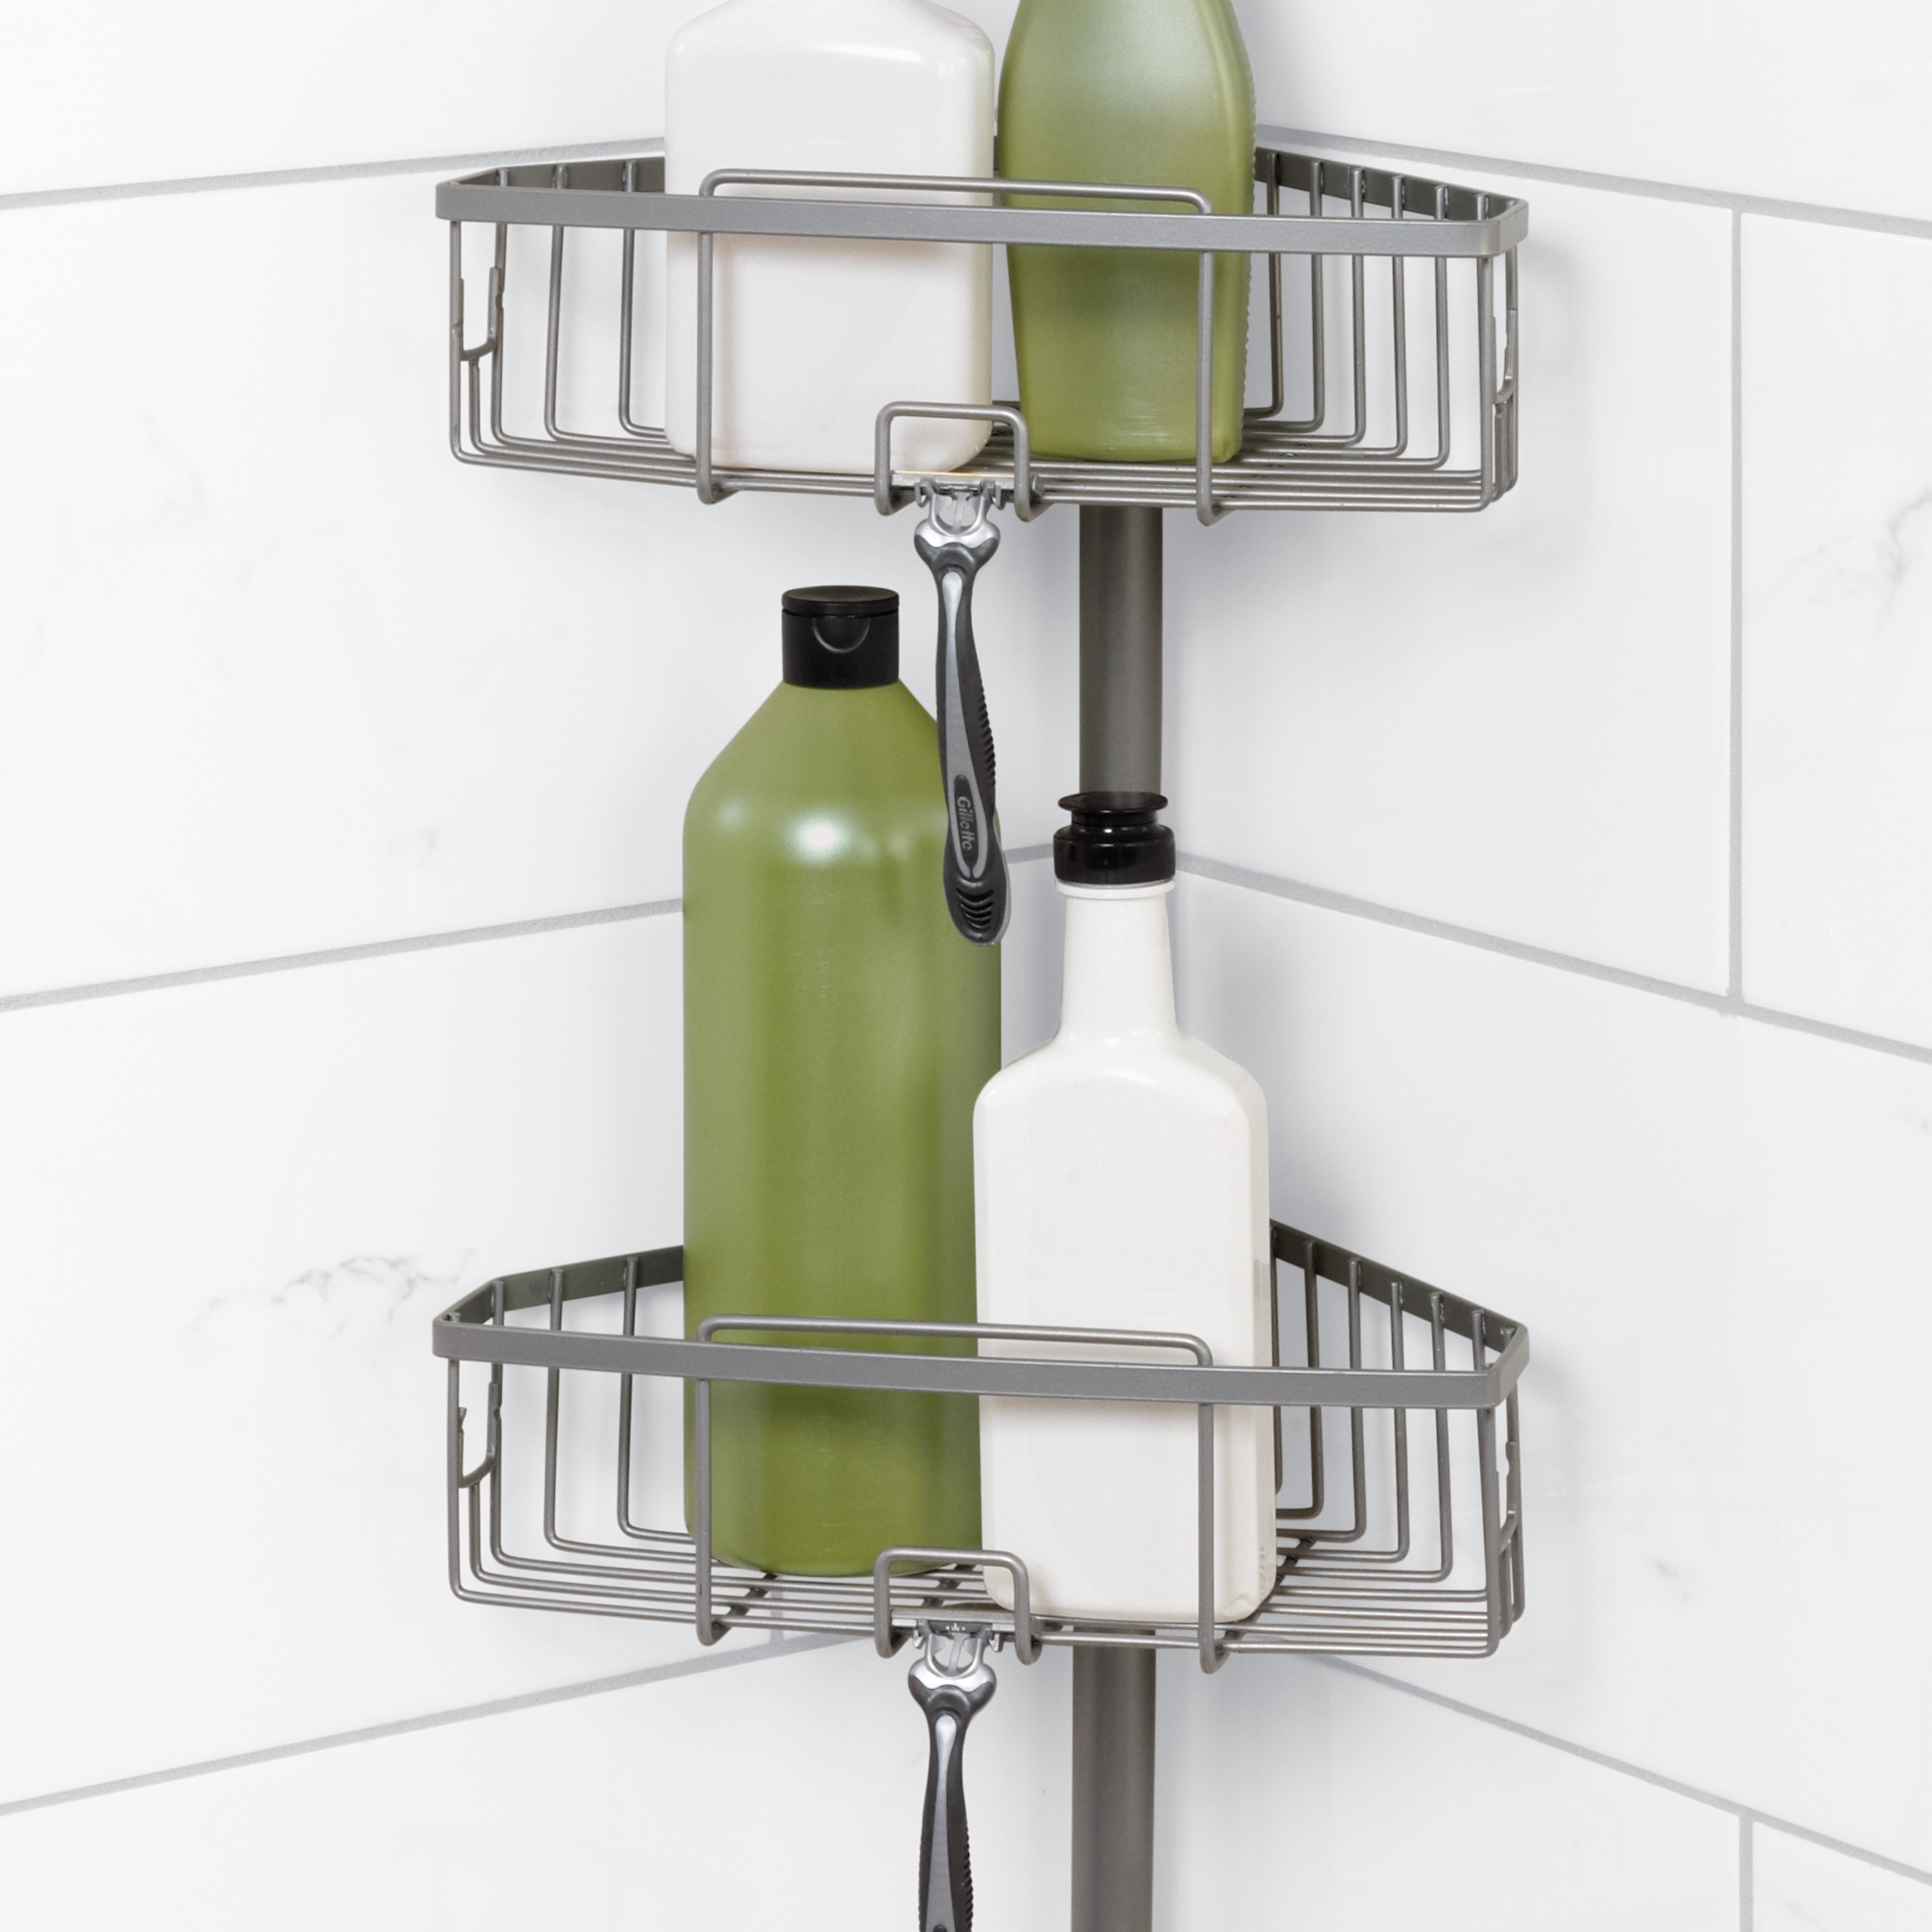 Zenith Products Premium Expandable Shower Caddy for Hand Held